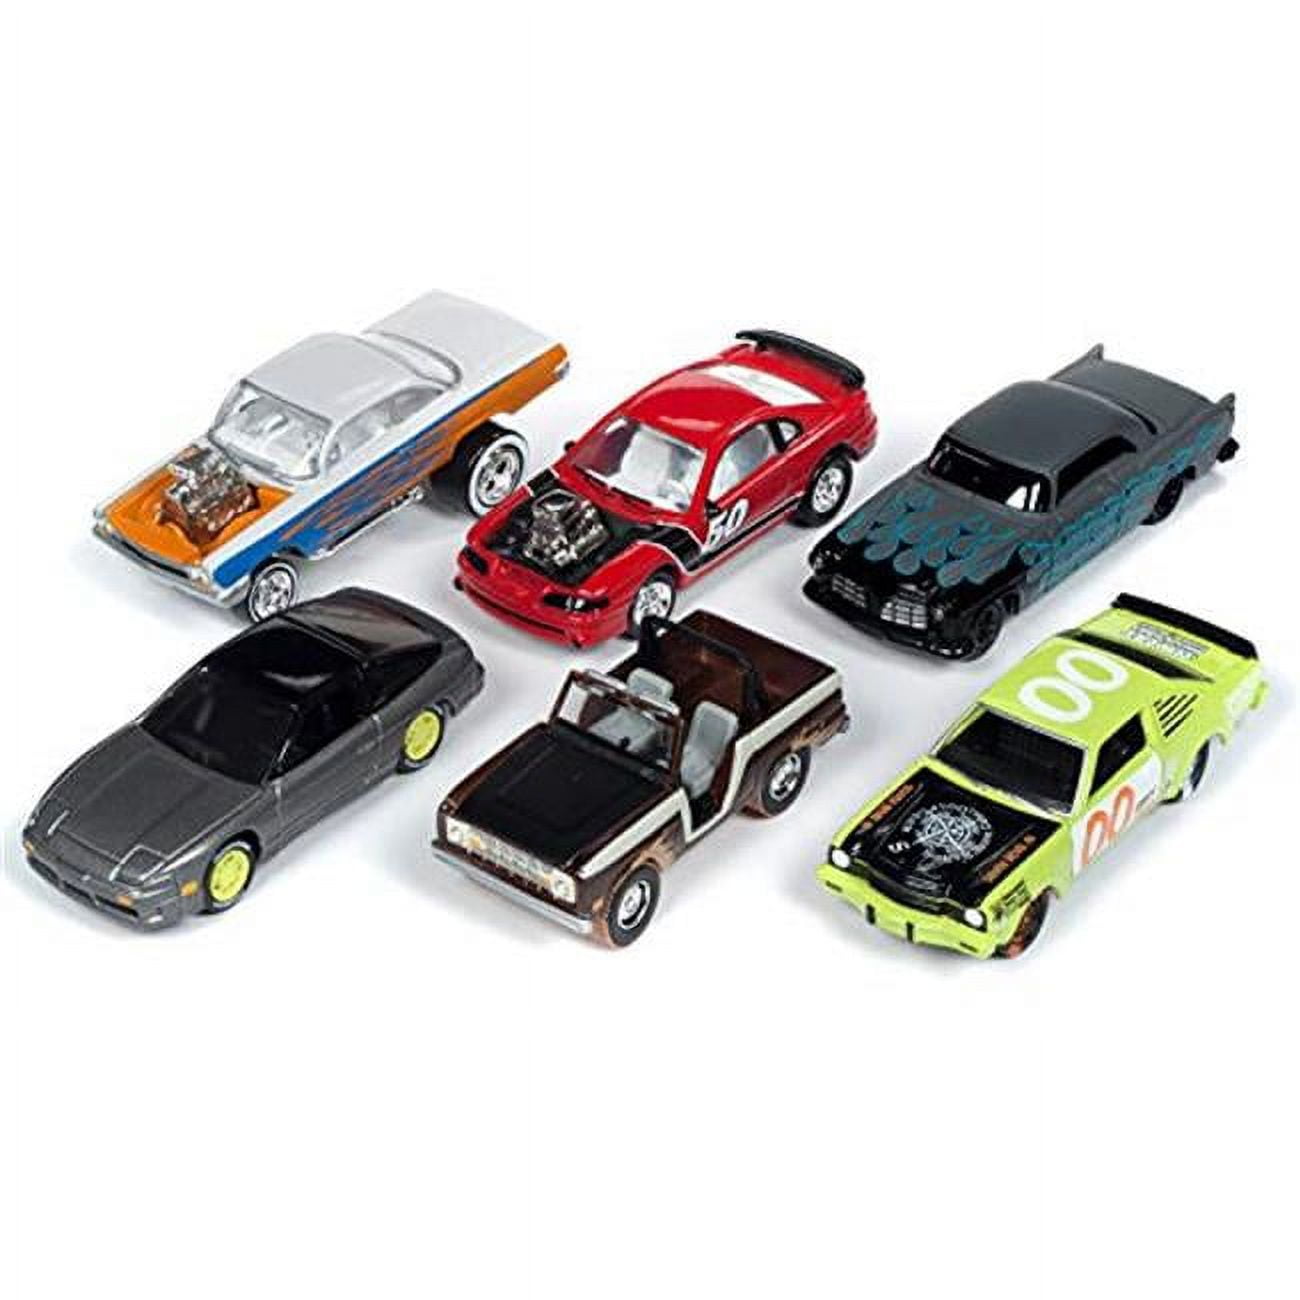 Jlsf012b Street Freaks 2019 Release 1, Set B Of 6 Cars Limited Edition To 3000 Pieces Worldwide 1-64 Diecast Model Car